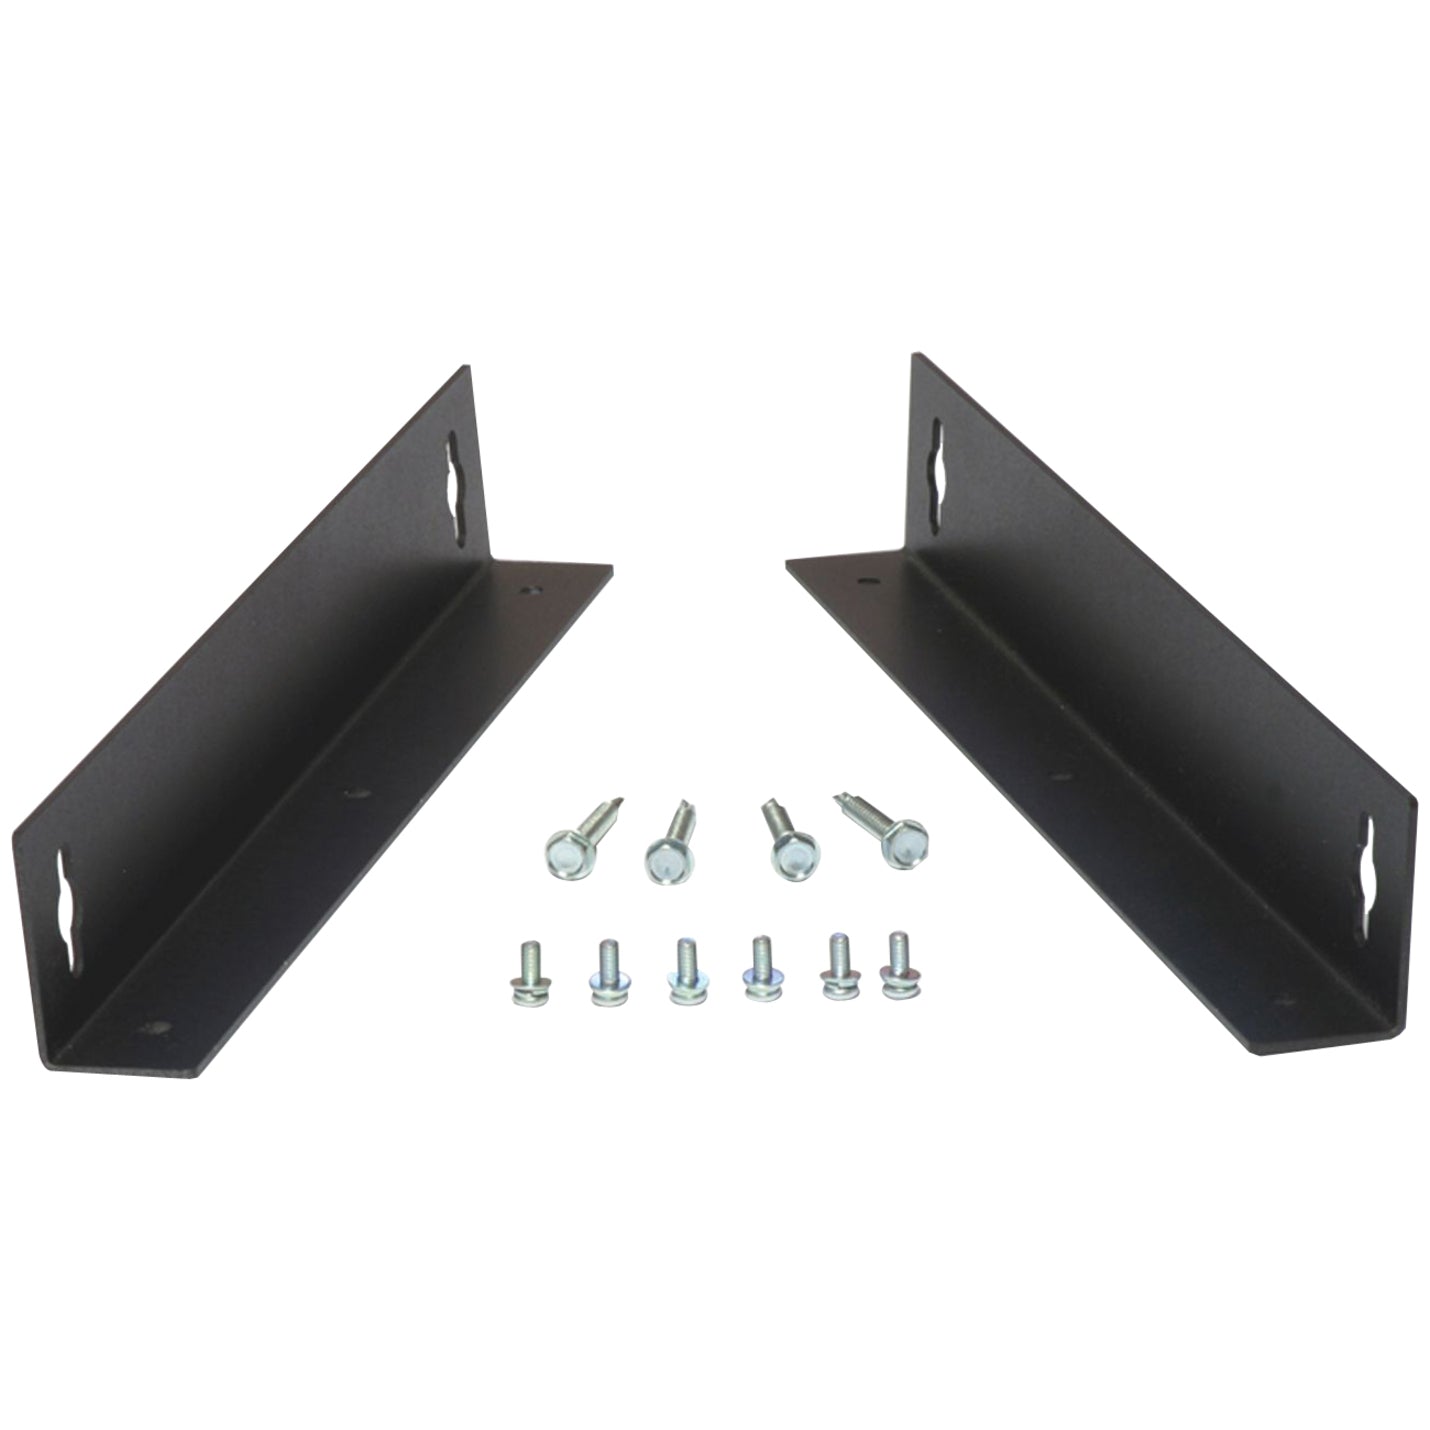 Minuteman EBRKTWALL Wall Mount Bracket, Compatible with Enterprise Plus and Endeavor UPS Series